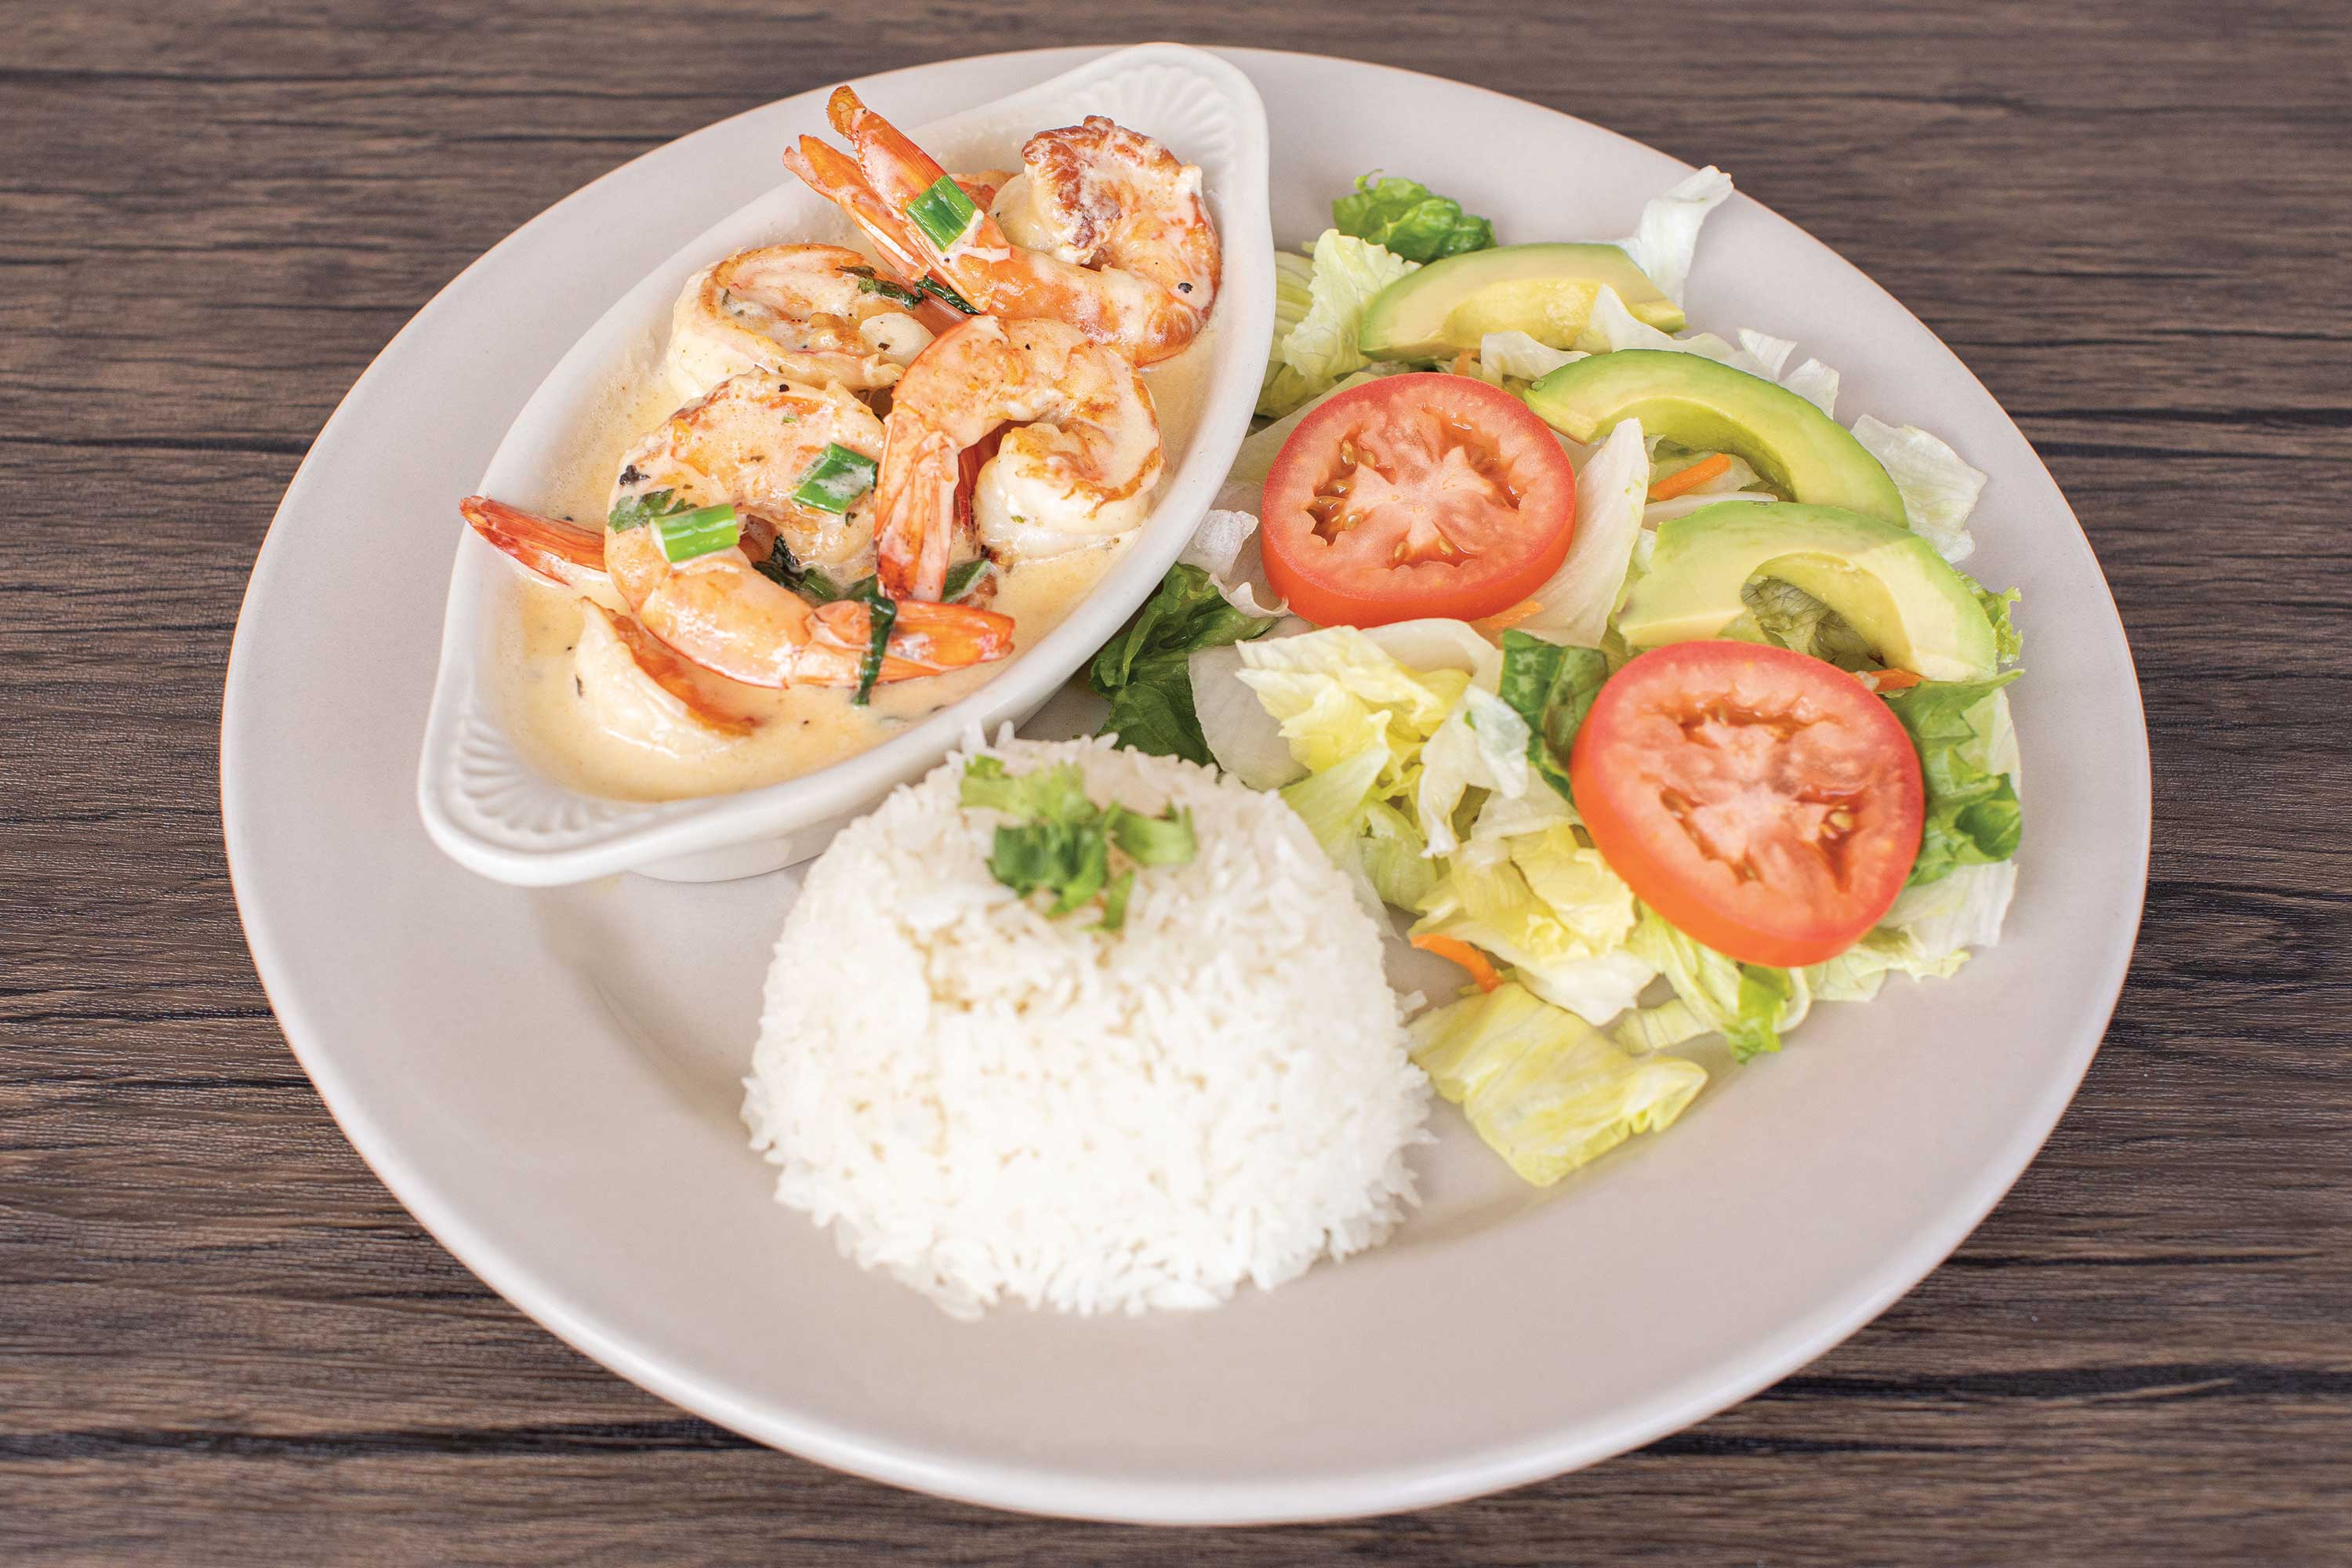 Image: Grilled shrimp in a creamy sauce in a white dish. Served alongside a lettuce and tomato salad with a mount of white rice.